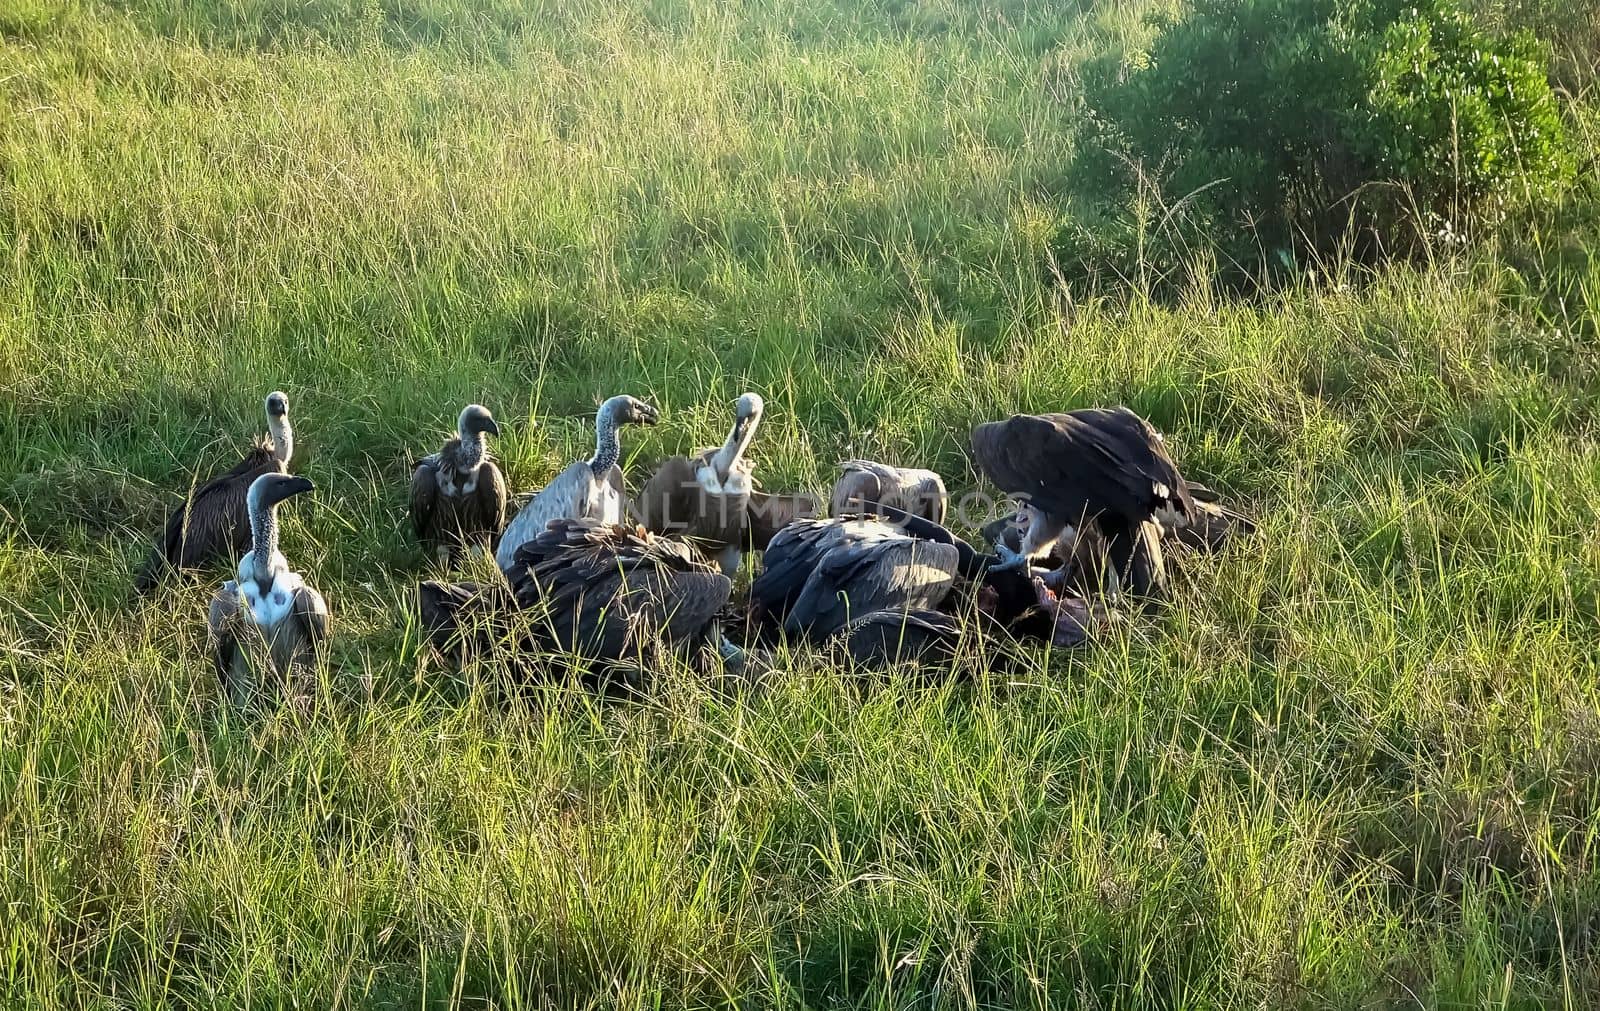 Numerous vultures fight over a carcass in the wilds of Africa. by MP_foto71